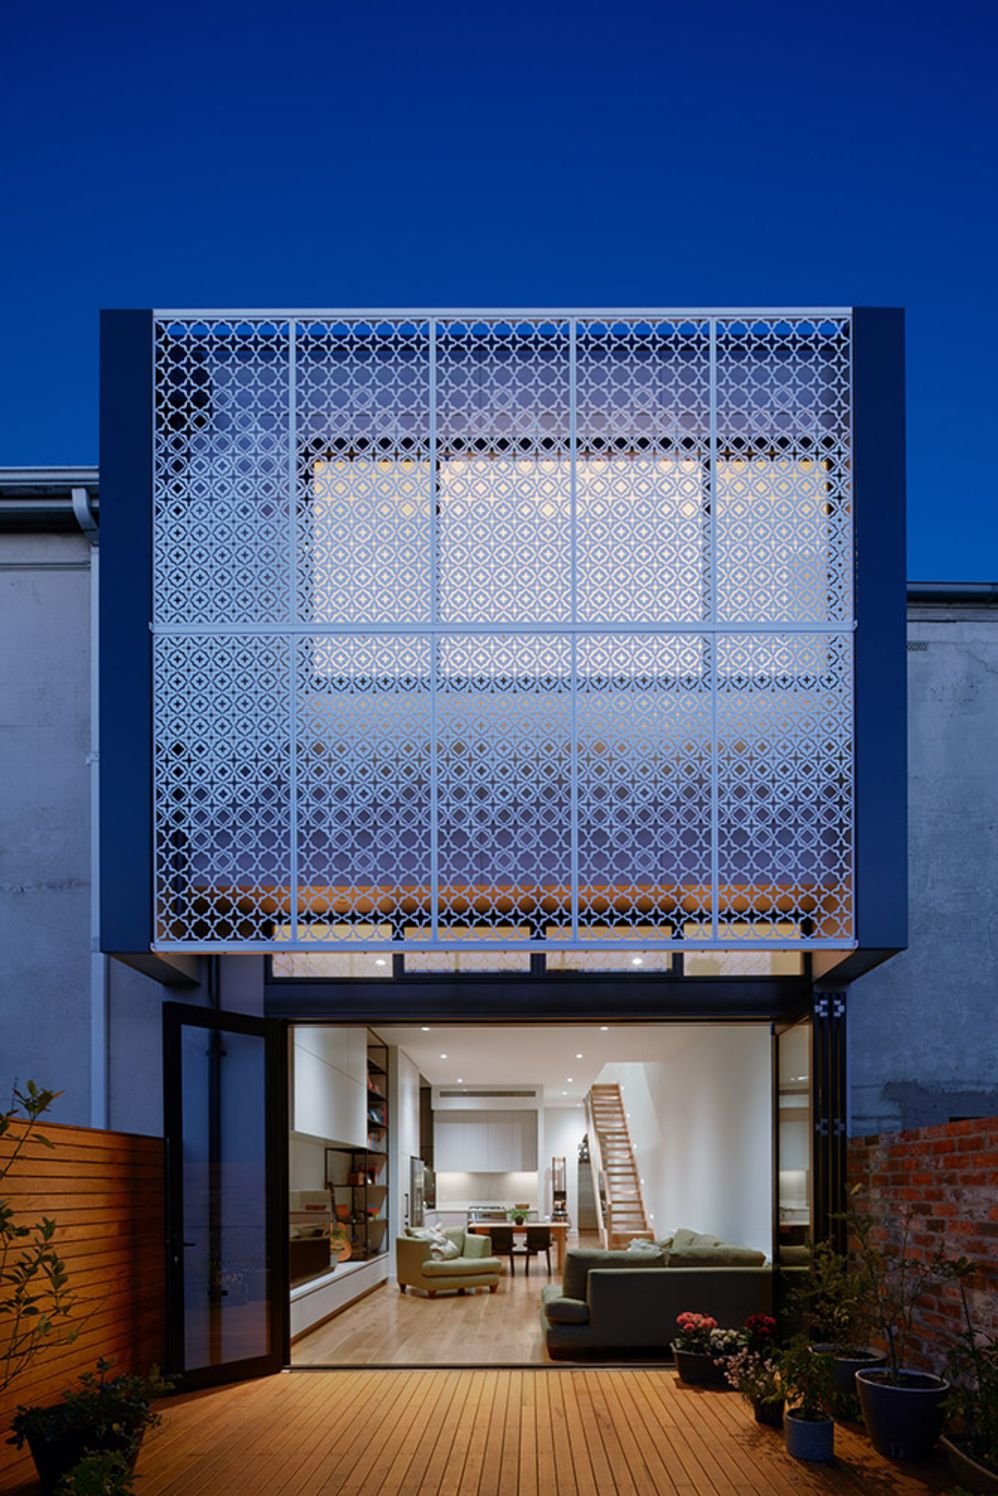 Australian teracced house renovation to give spacious indoor vibrancy in harmonious tones (1)